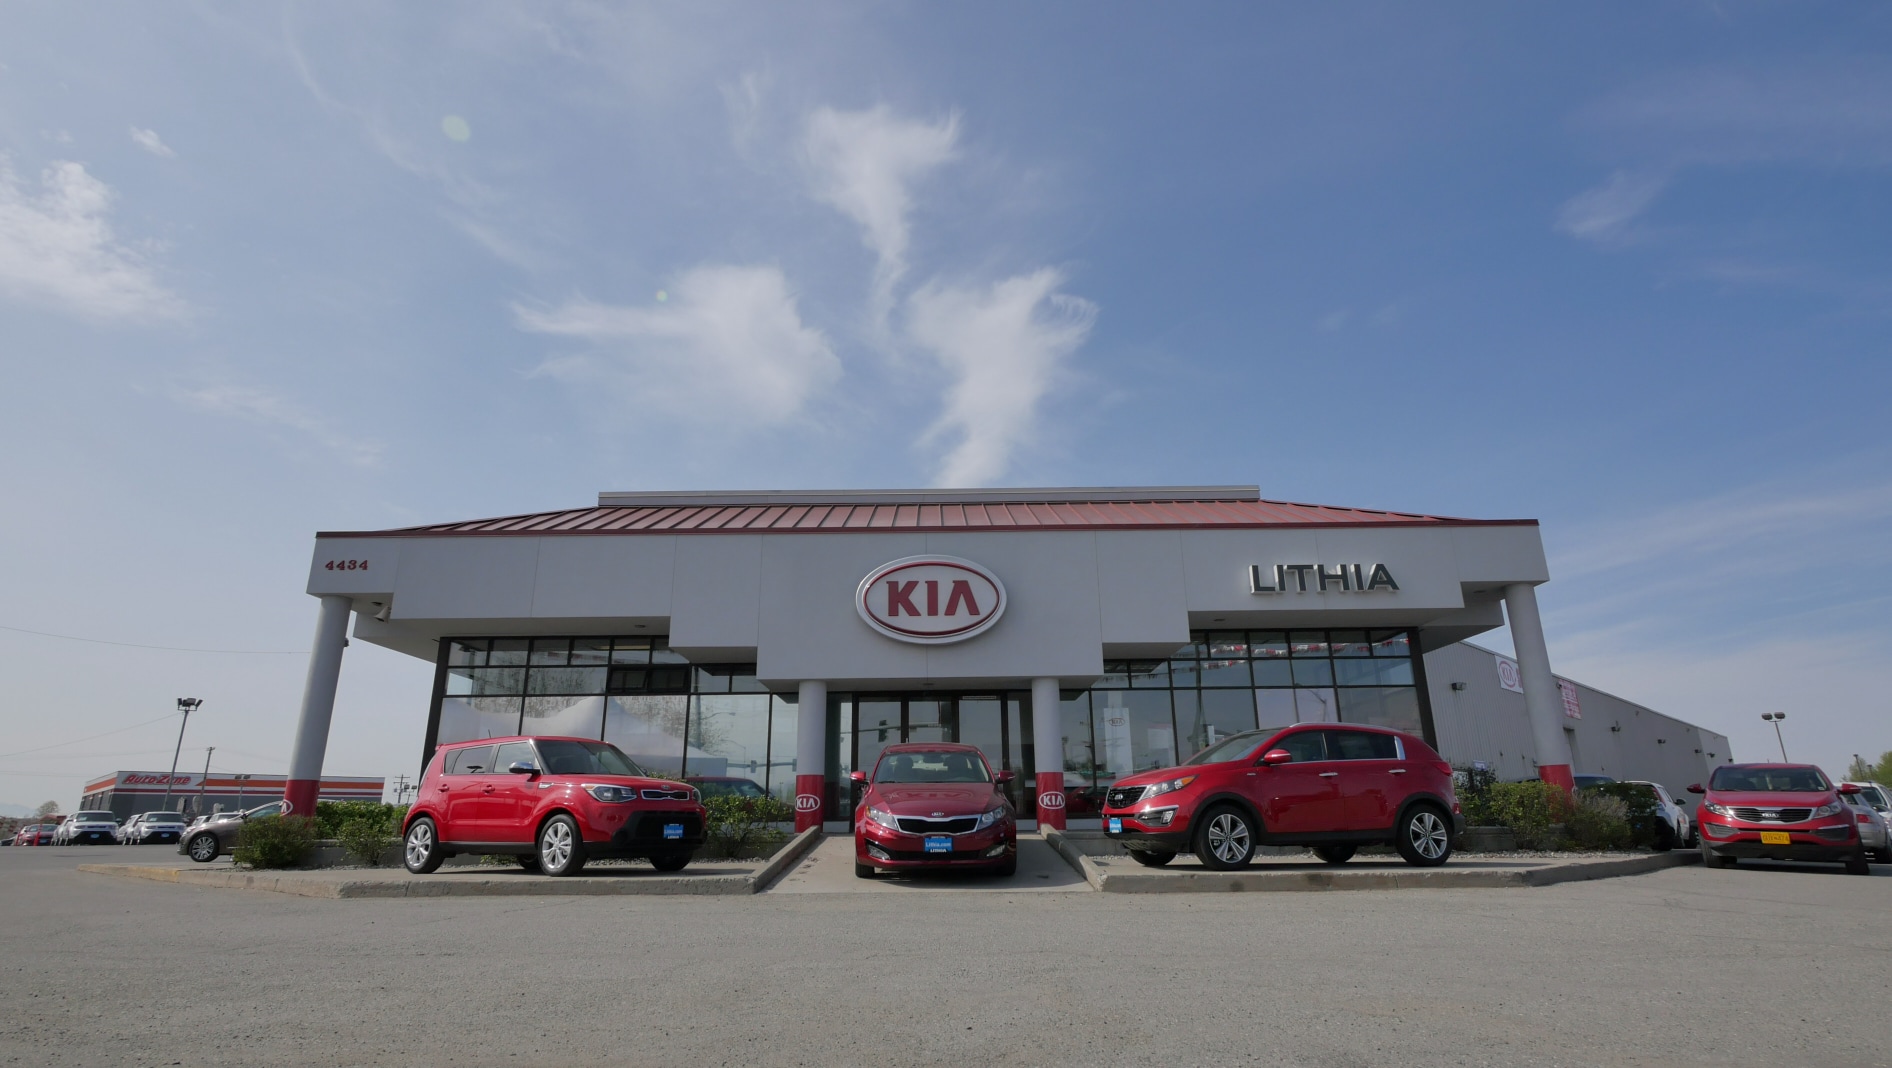 Used Cars For Sale In Anchorage Lithia Kia Of Anchorage